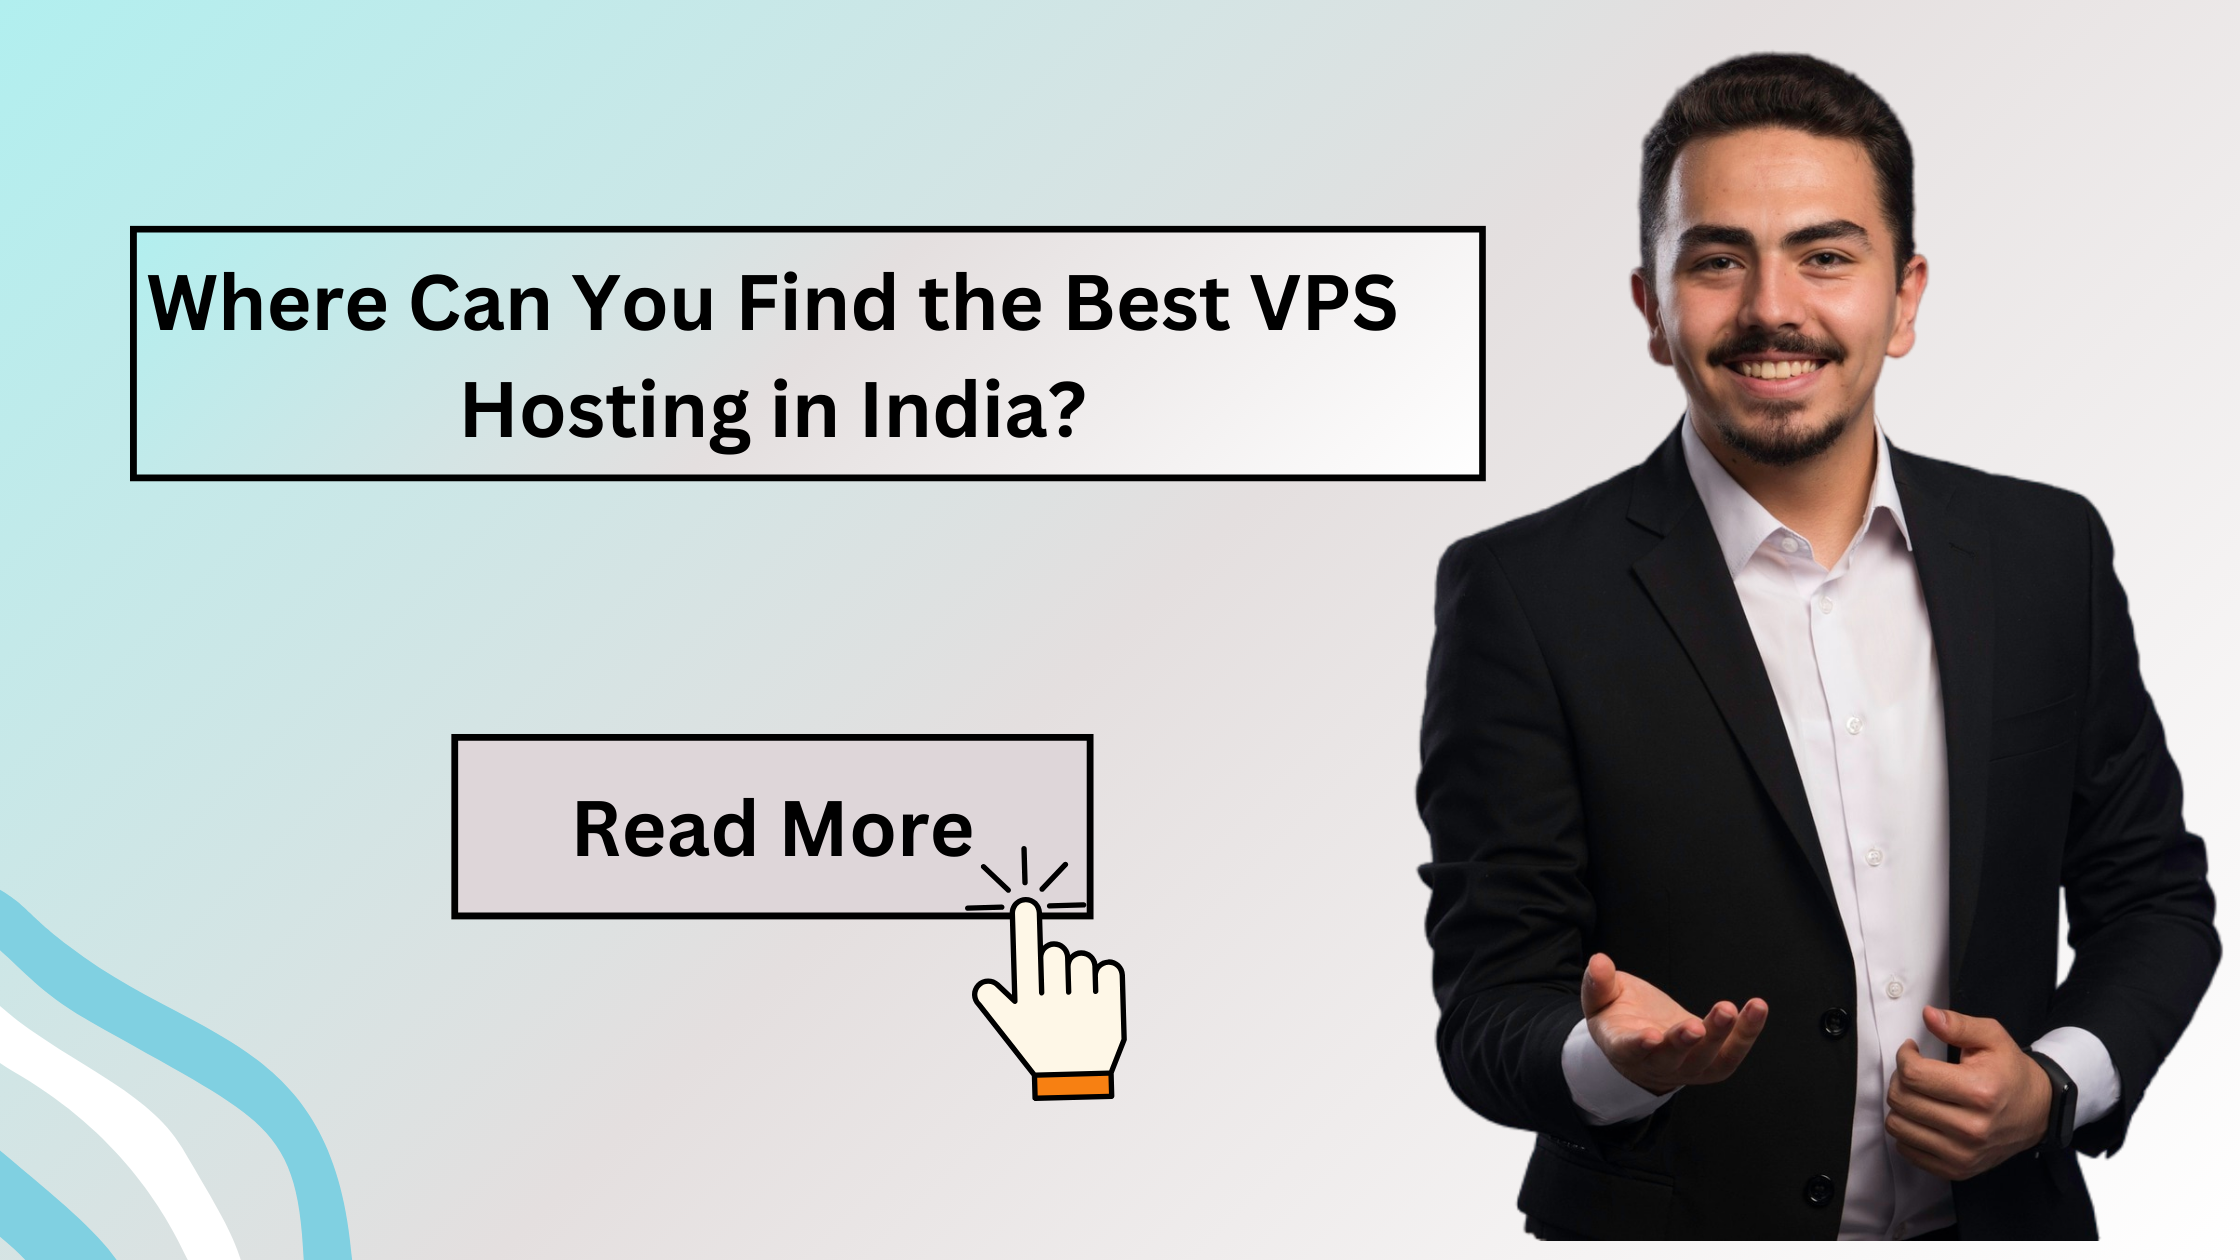 the top places where you can find reliable and affordable VPS hosting in India. We'll also discuss some of the best providers like Hostingbuzz and Ideastack, who offer a range of hosting services